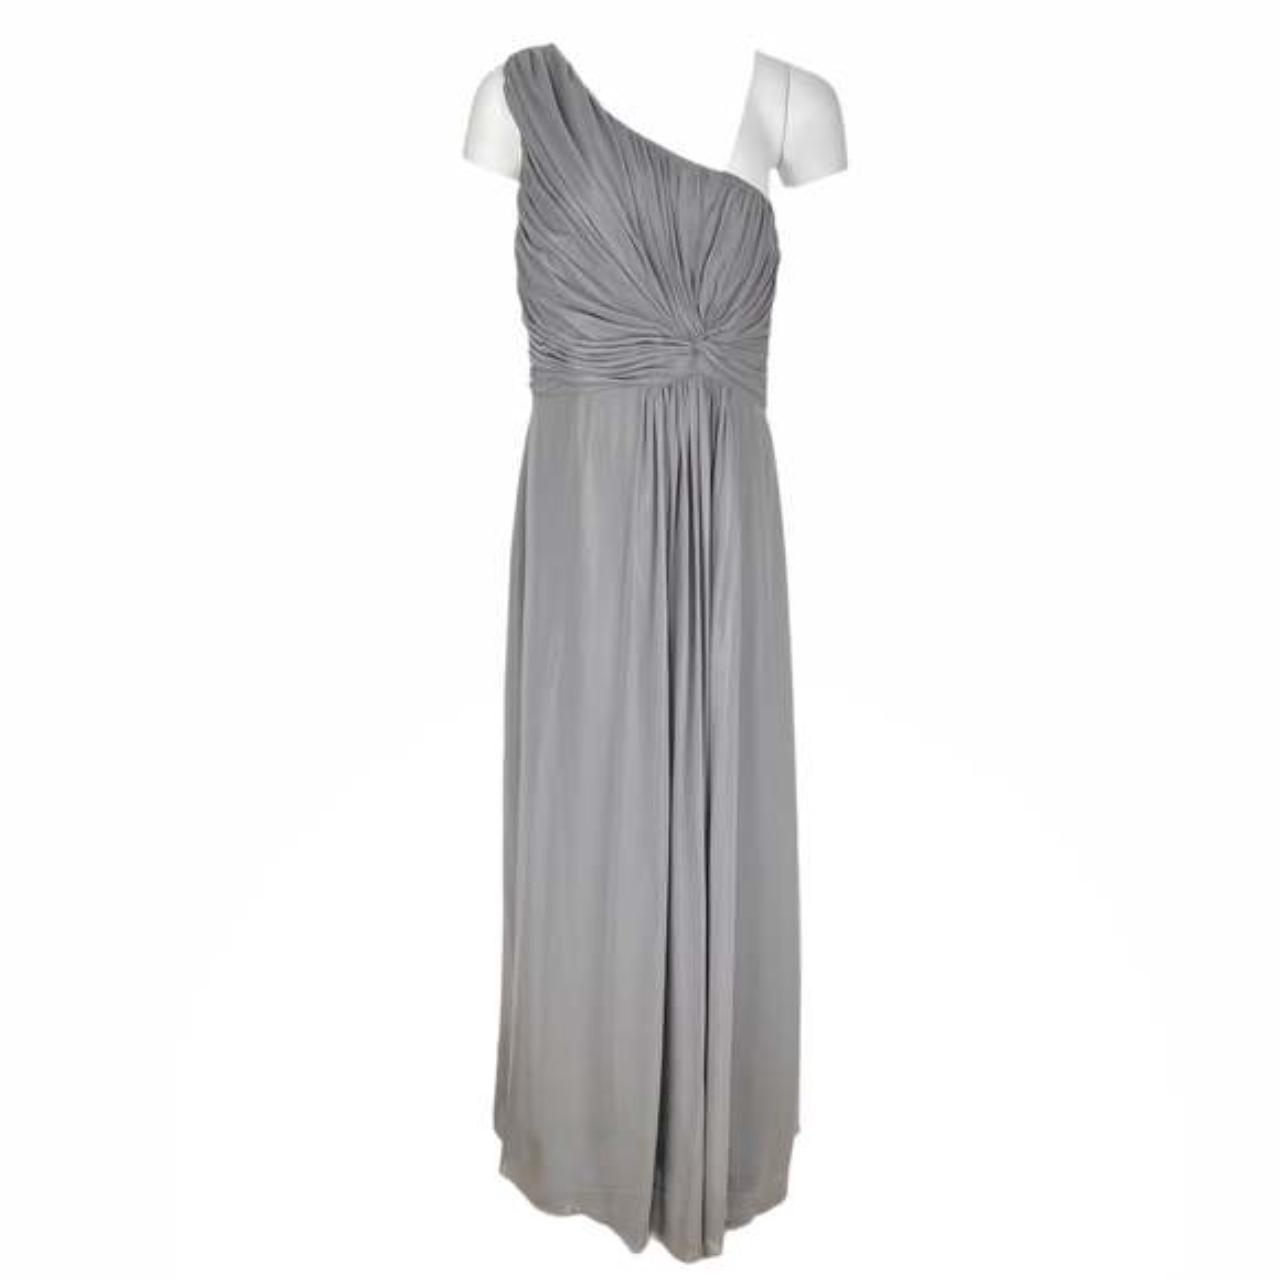 Product Image 1 - After Six Gray Gown

Description:
* Gray
*